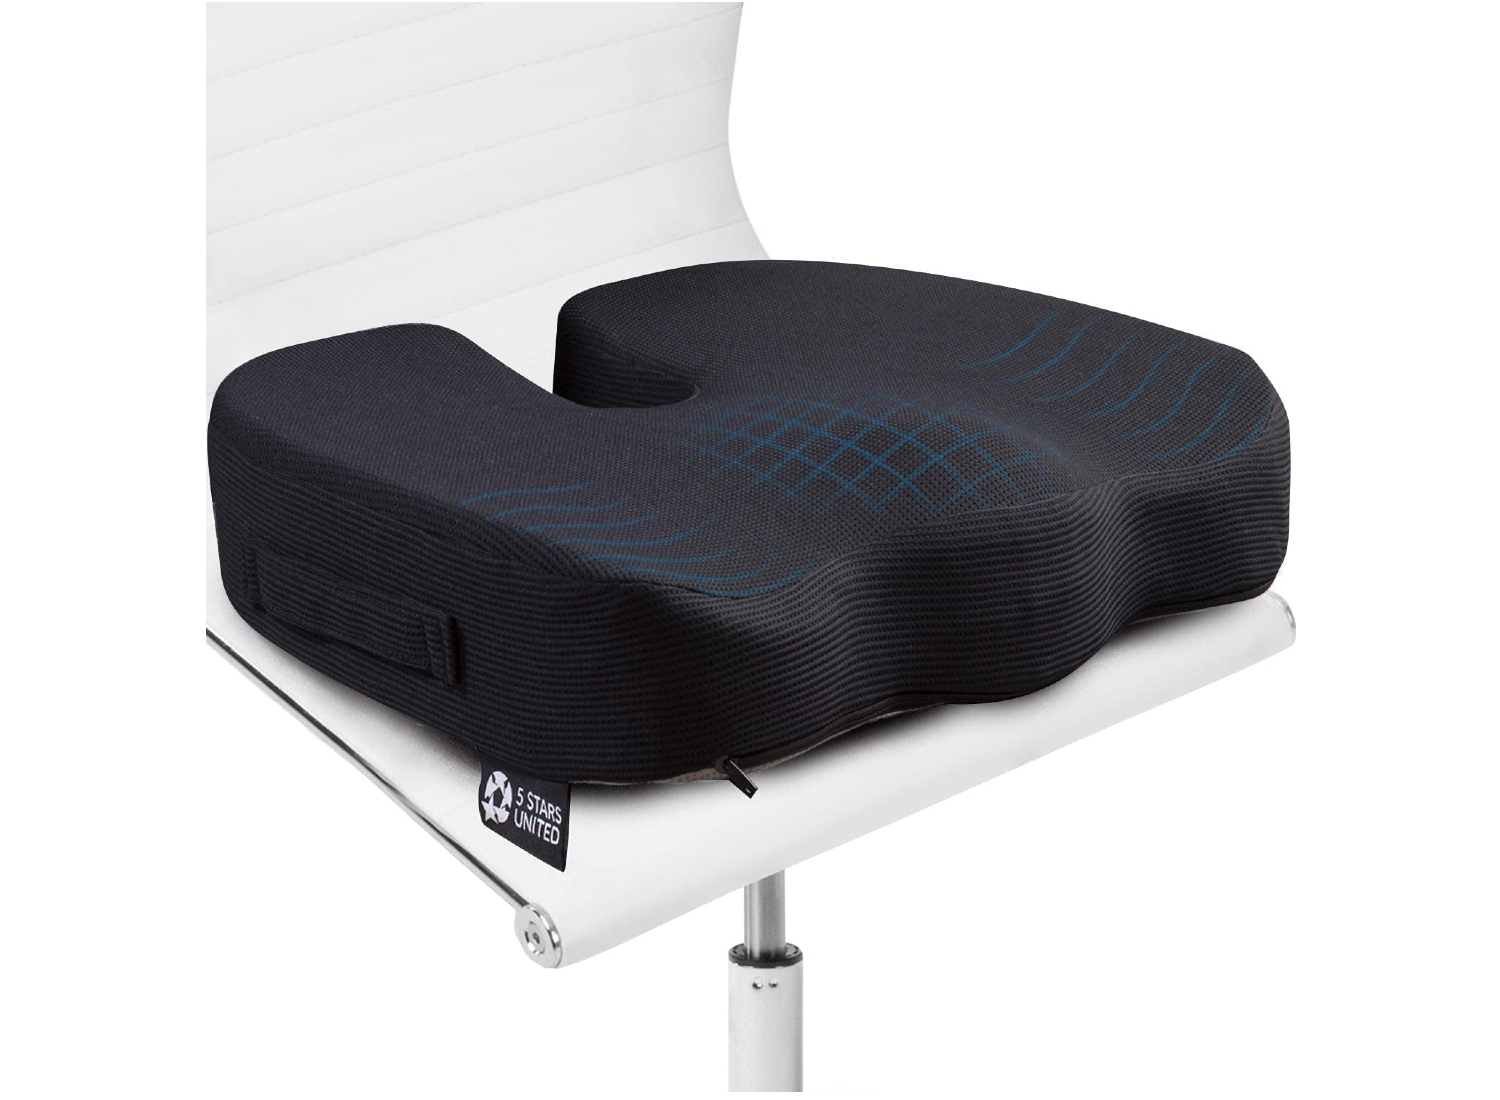 What Is the Best Cooling Seat Cushion? – Everlasting Comfort